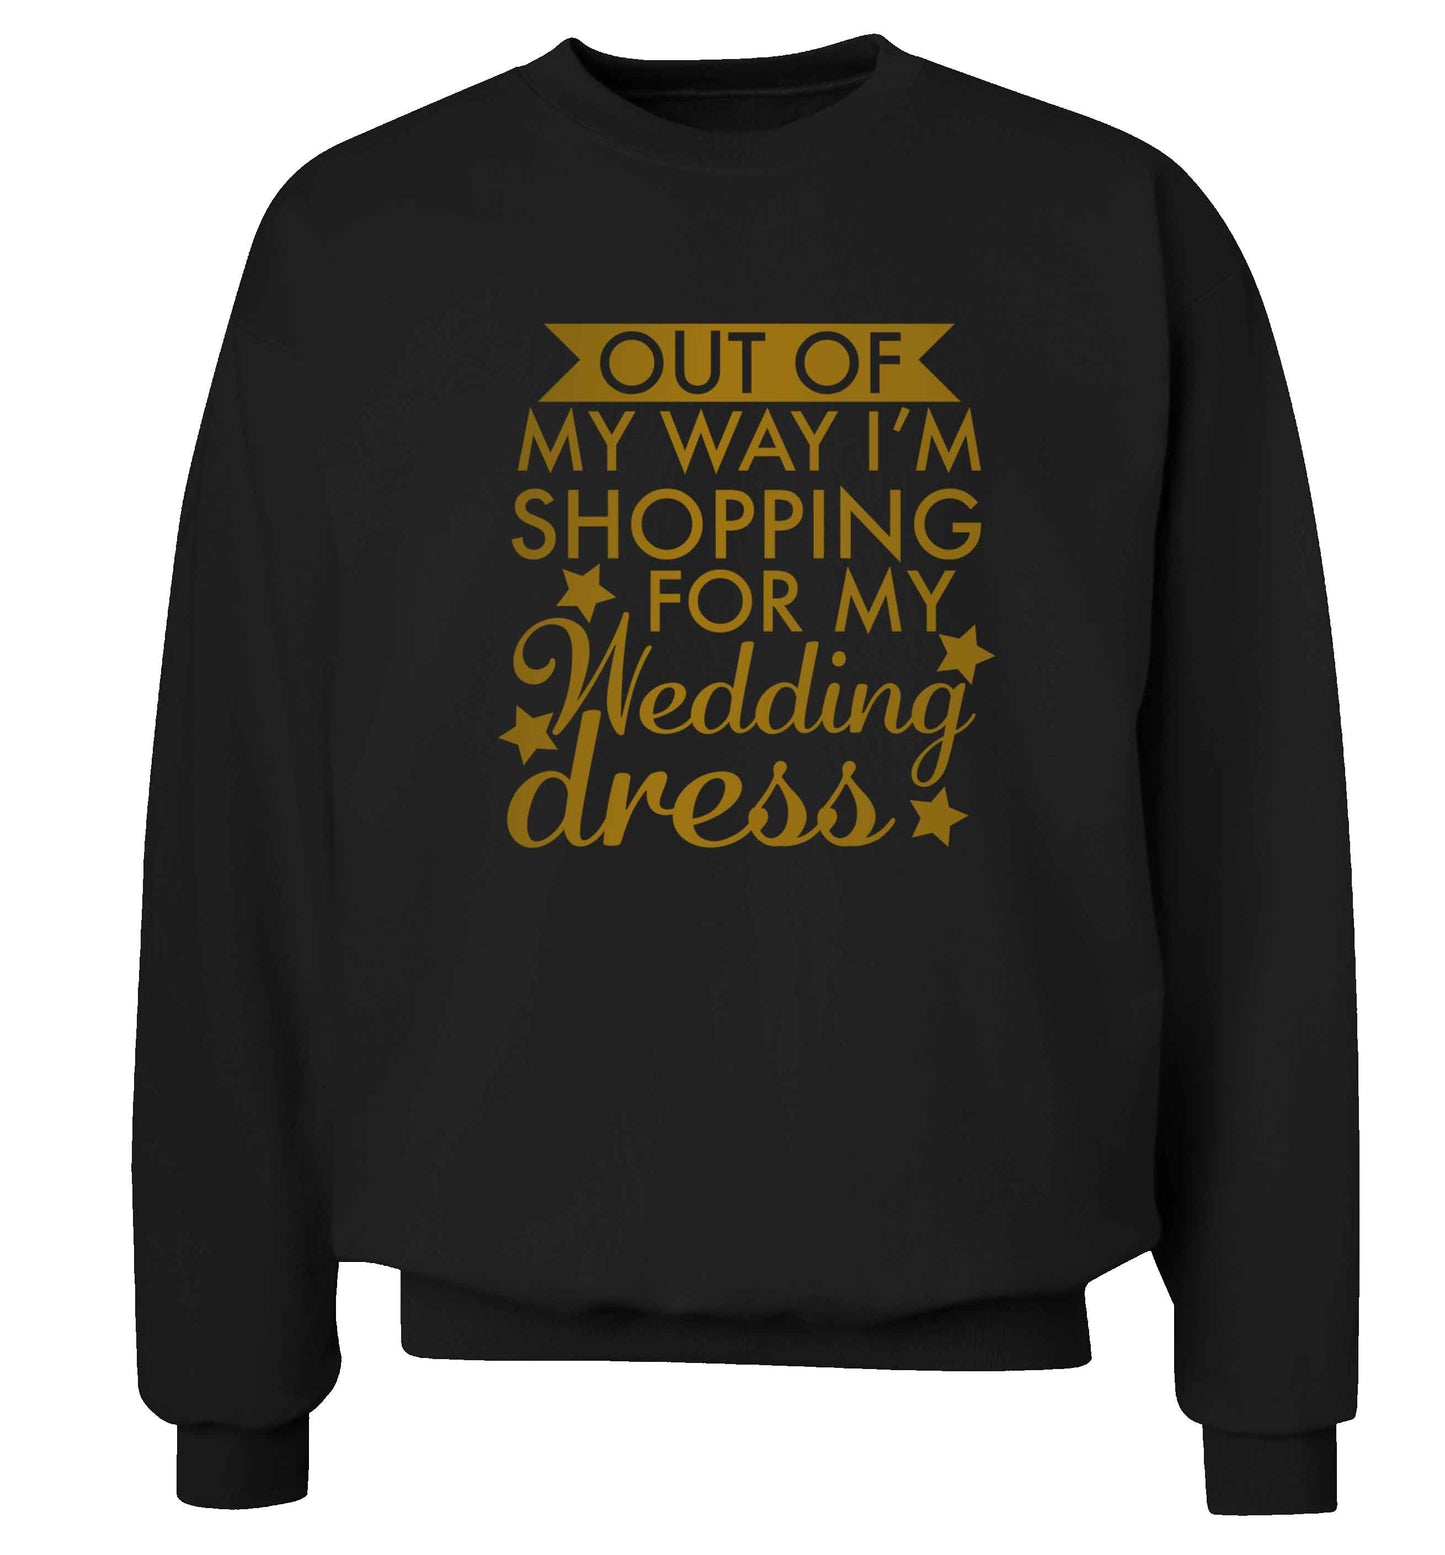 Out of my way I'm shopping for my wedding dress adult's unisex black sweater 2XL